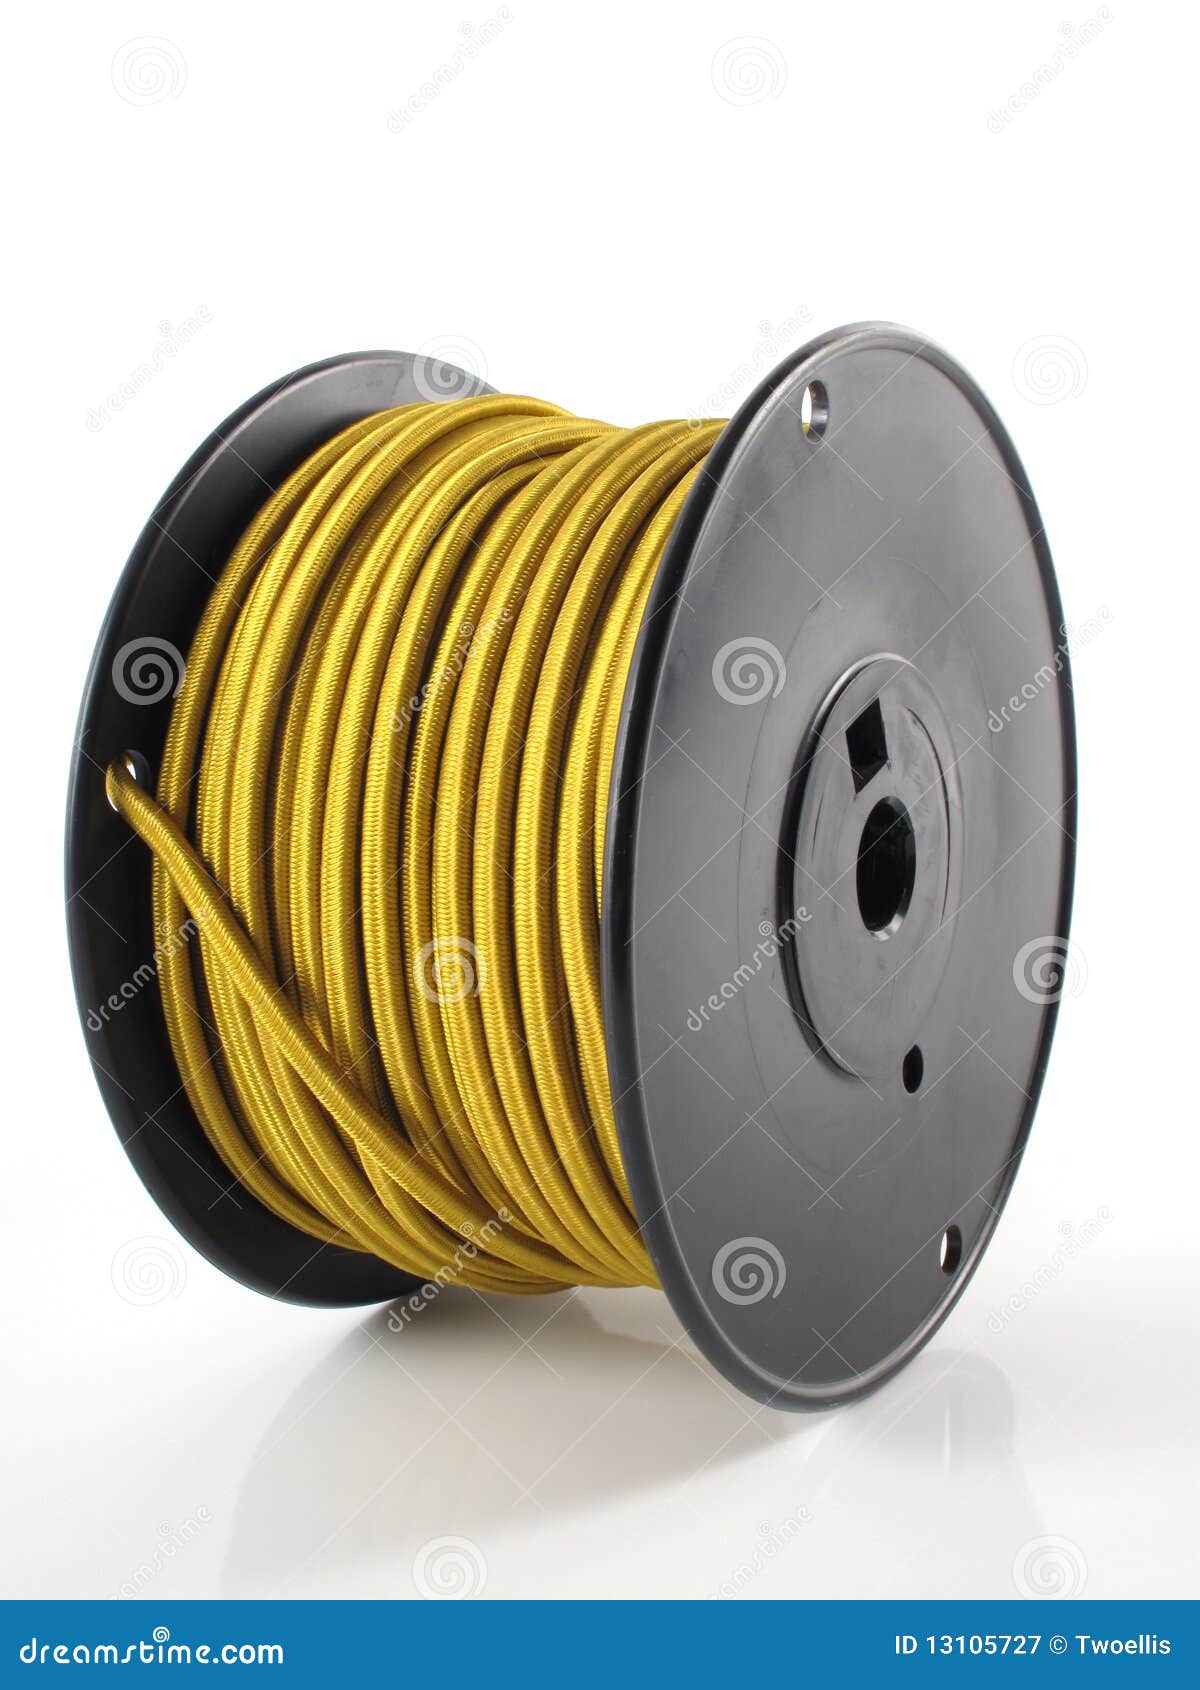 Spool of wire stock image. Image of cabling, silver, twist - 13105727